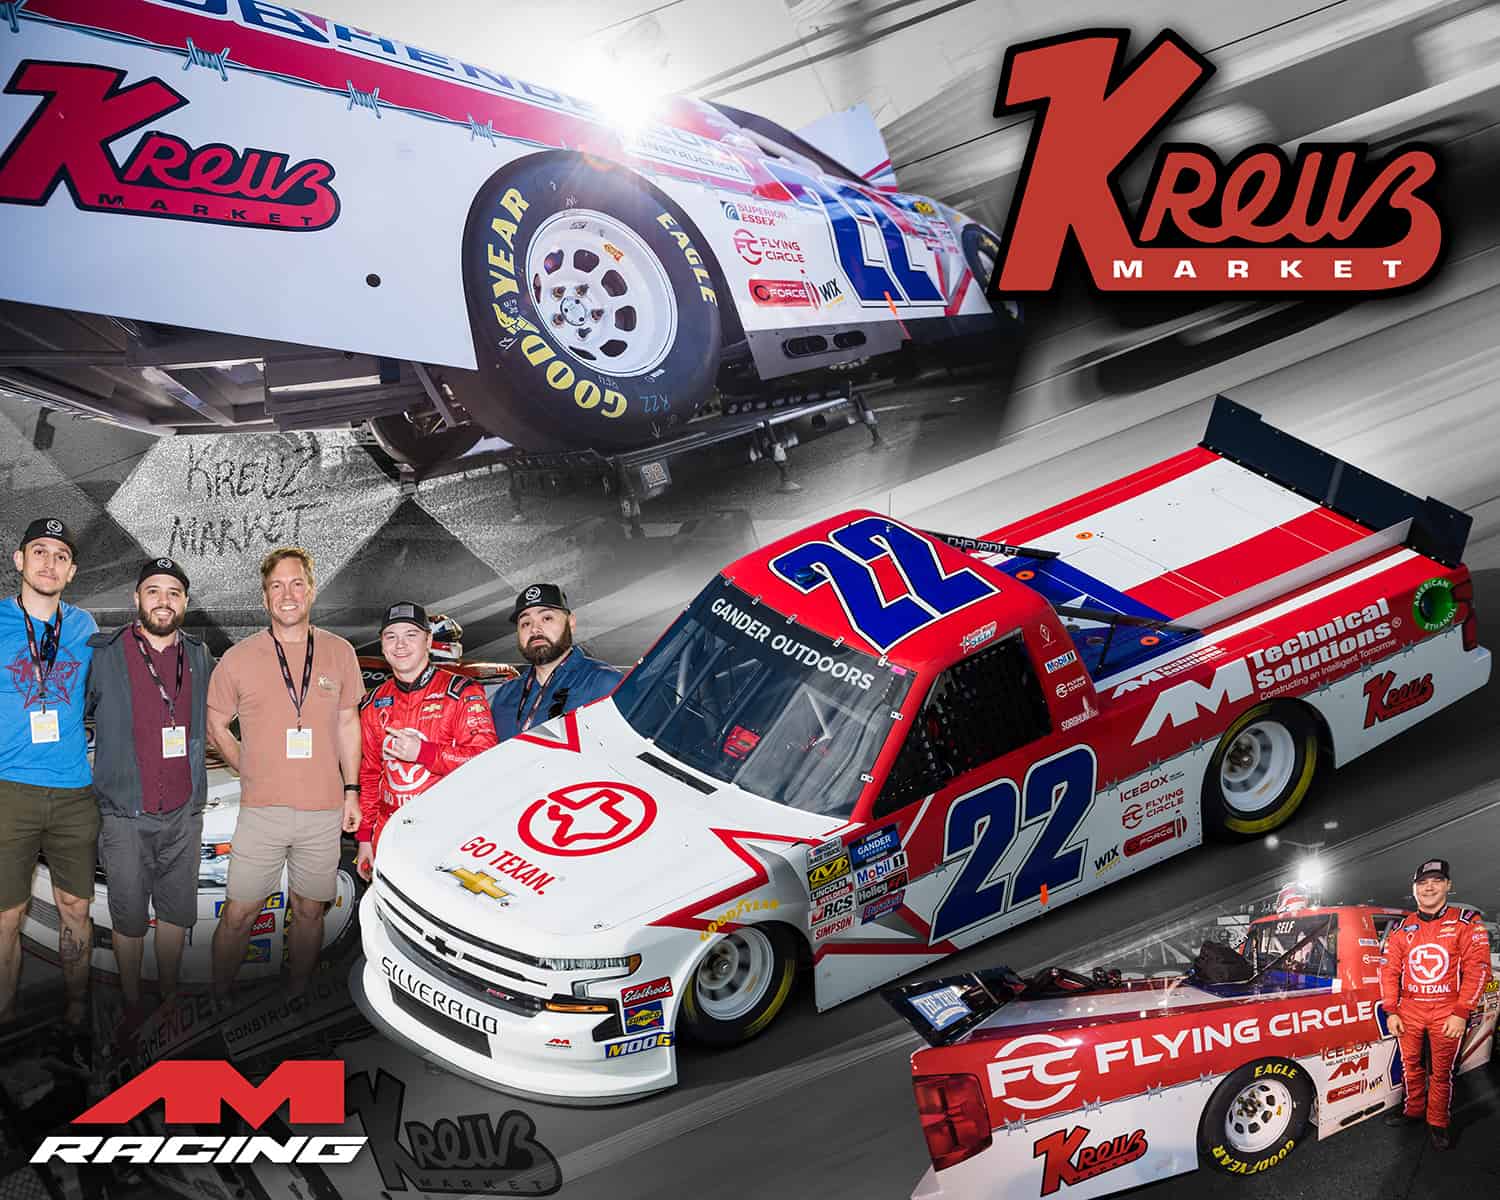 Read more about the article Kreuz Market renews partnership with AM Racing for 2020 Truck Series season